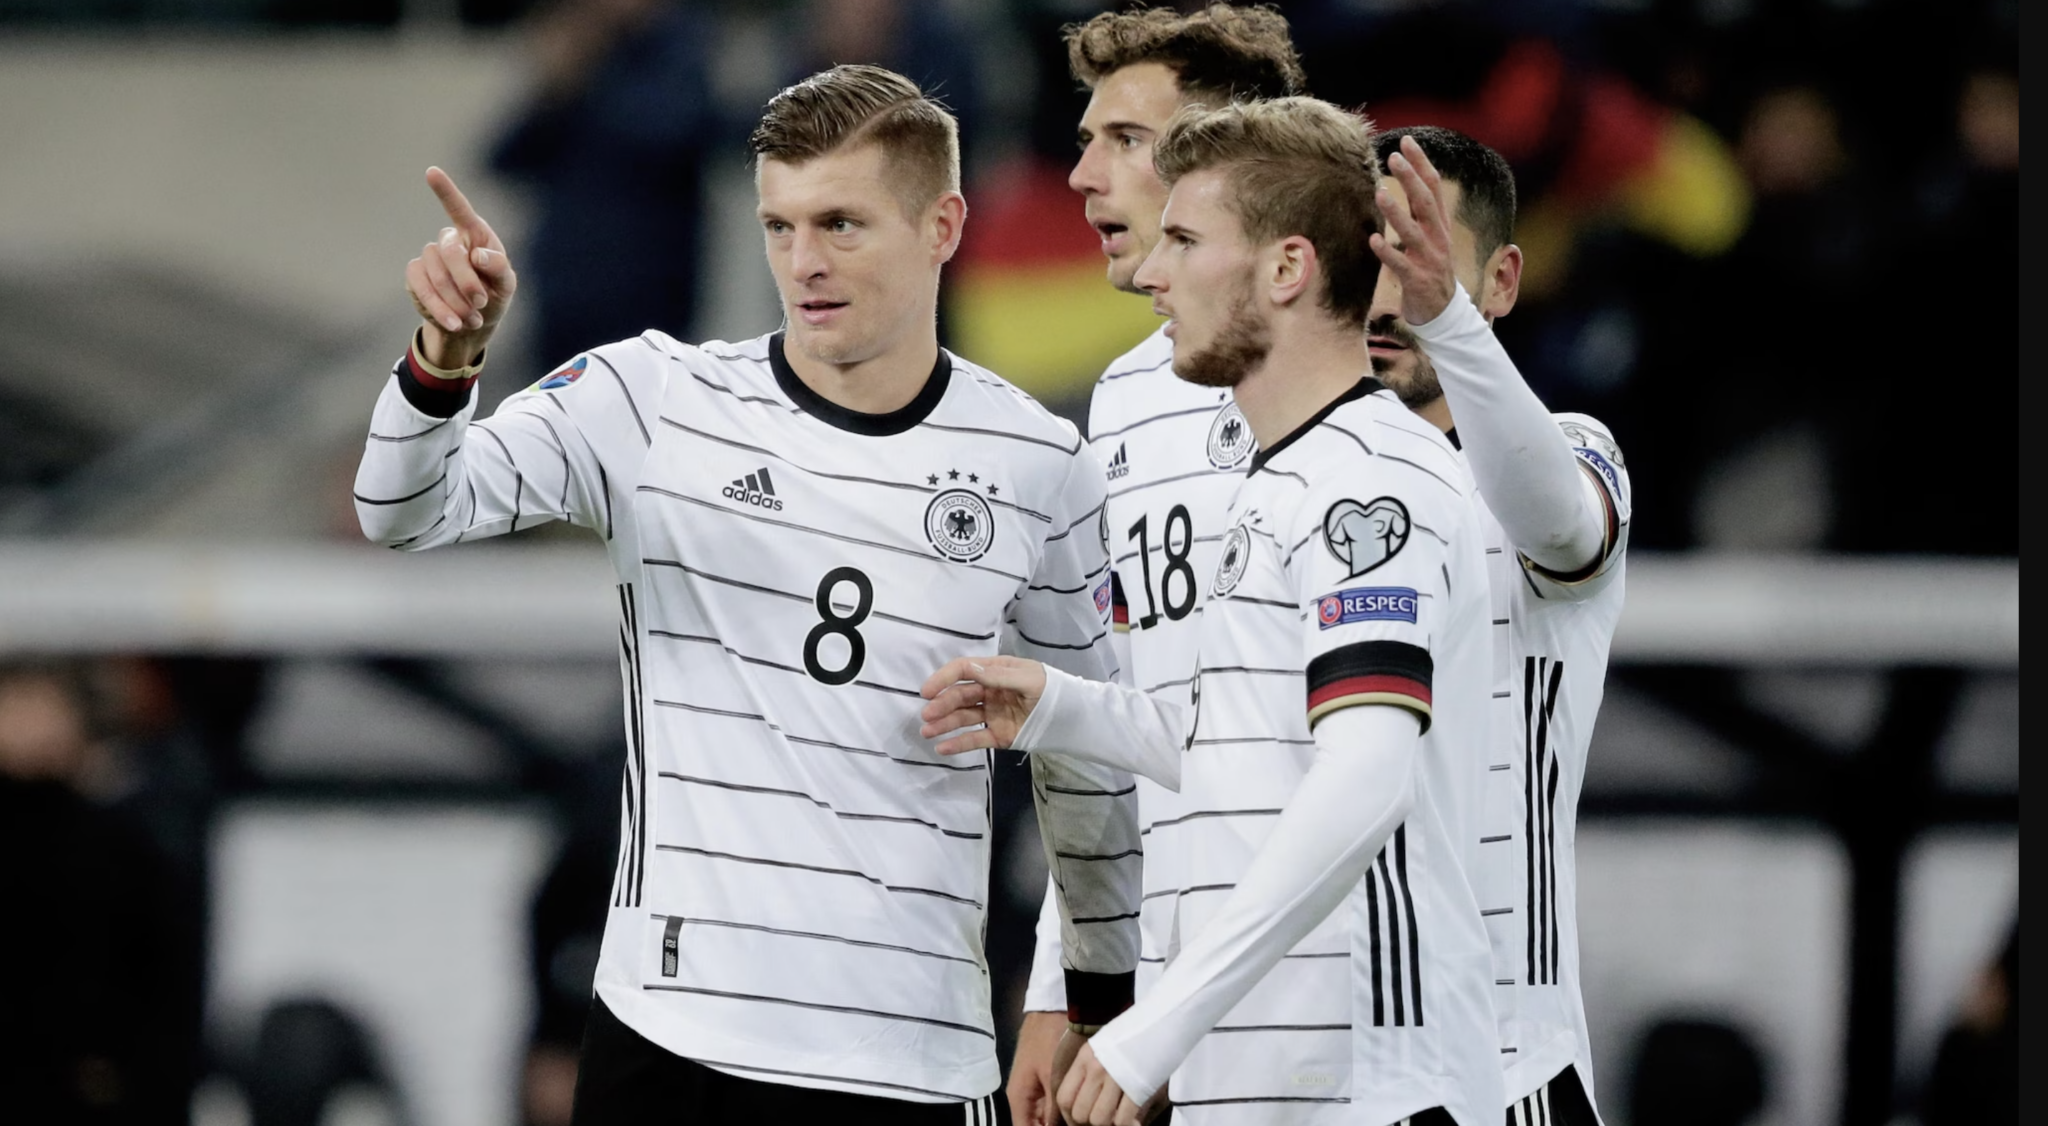 ARD and ZDF to broadcast international games of Germanys national football team